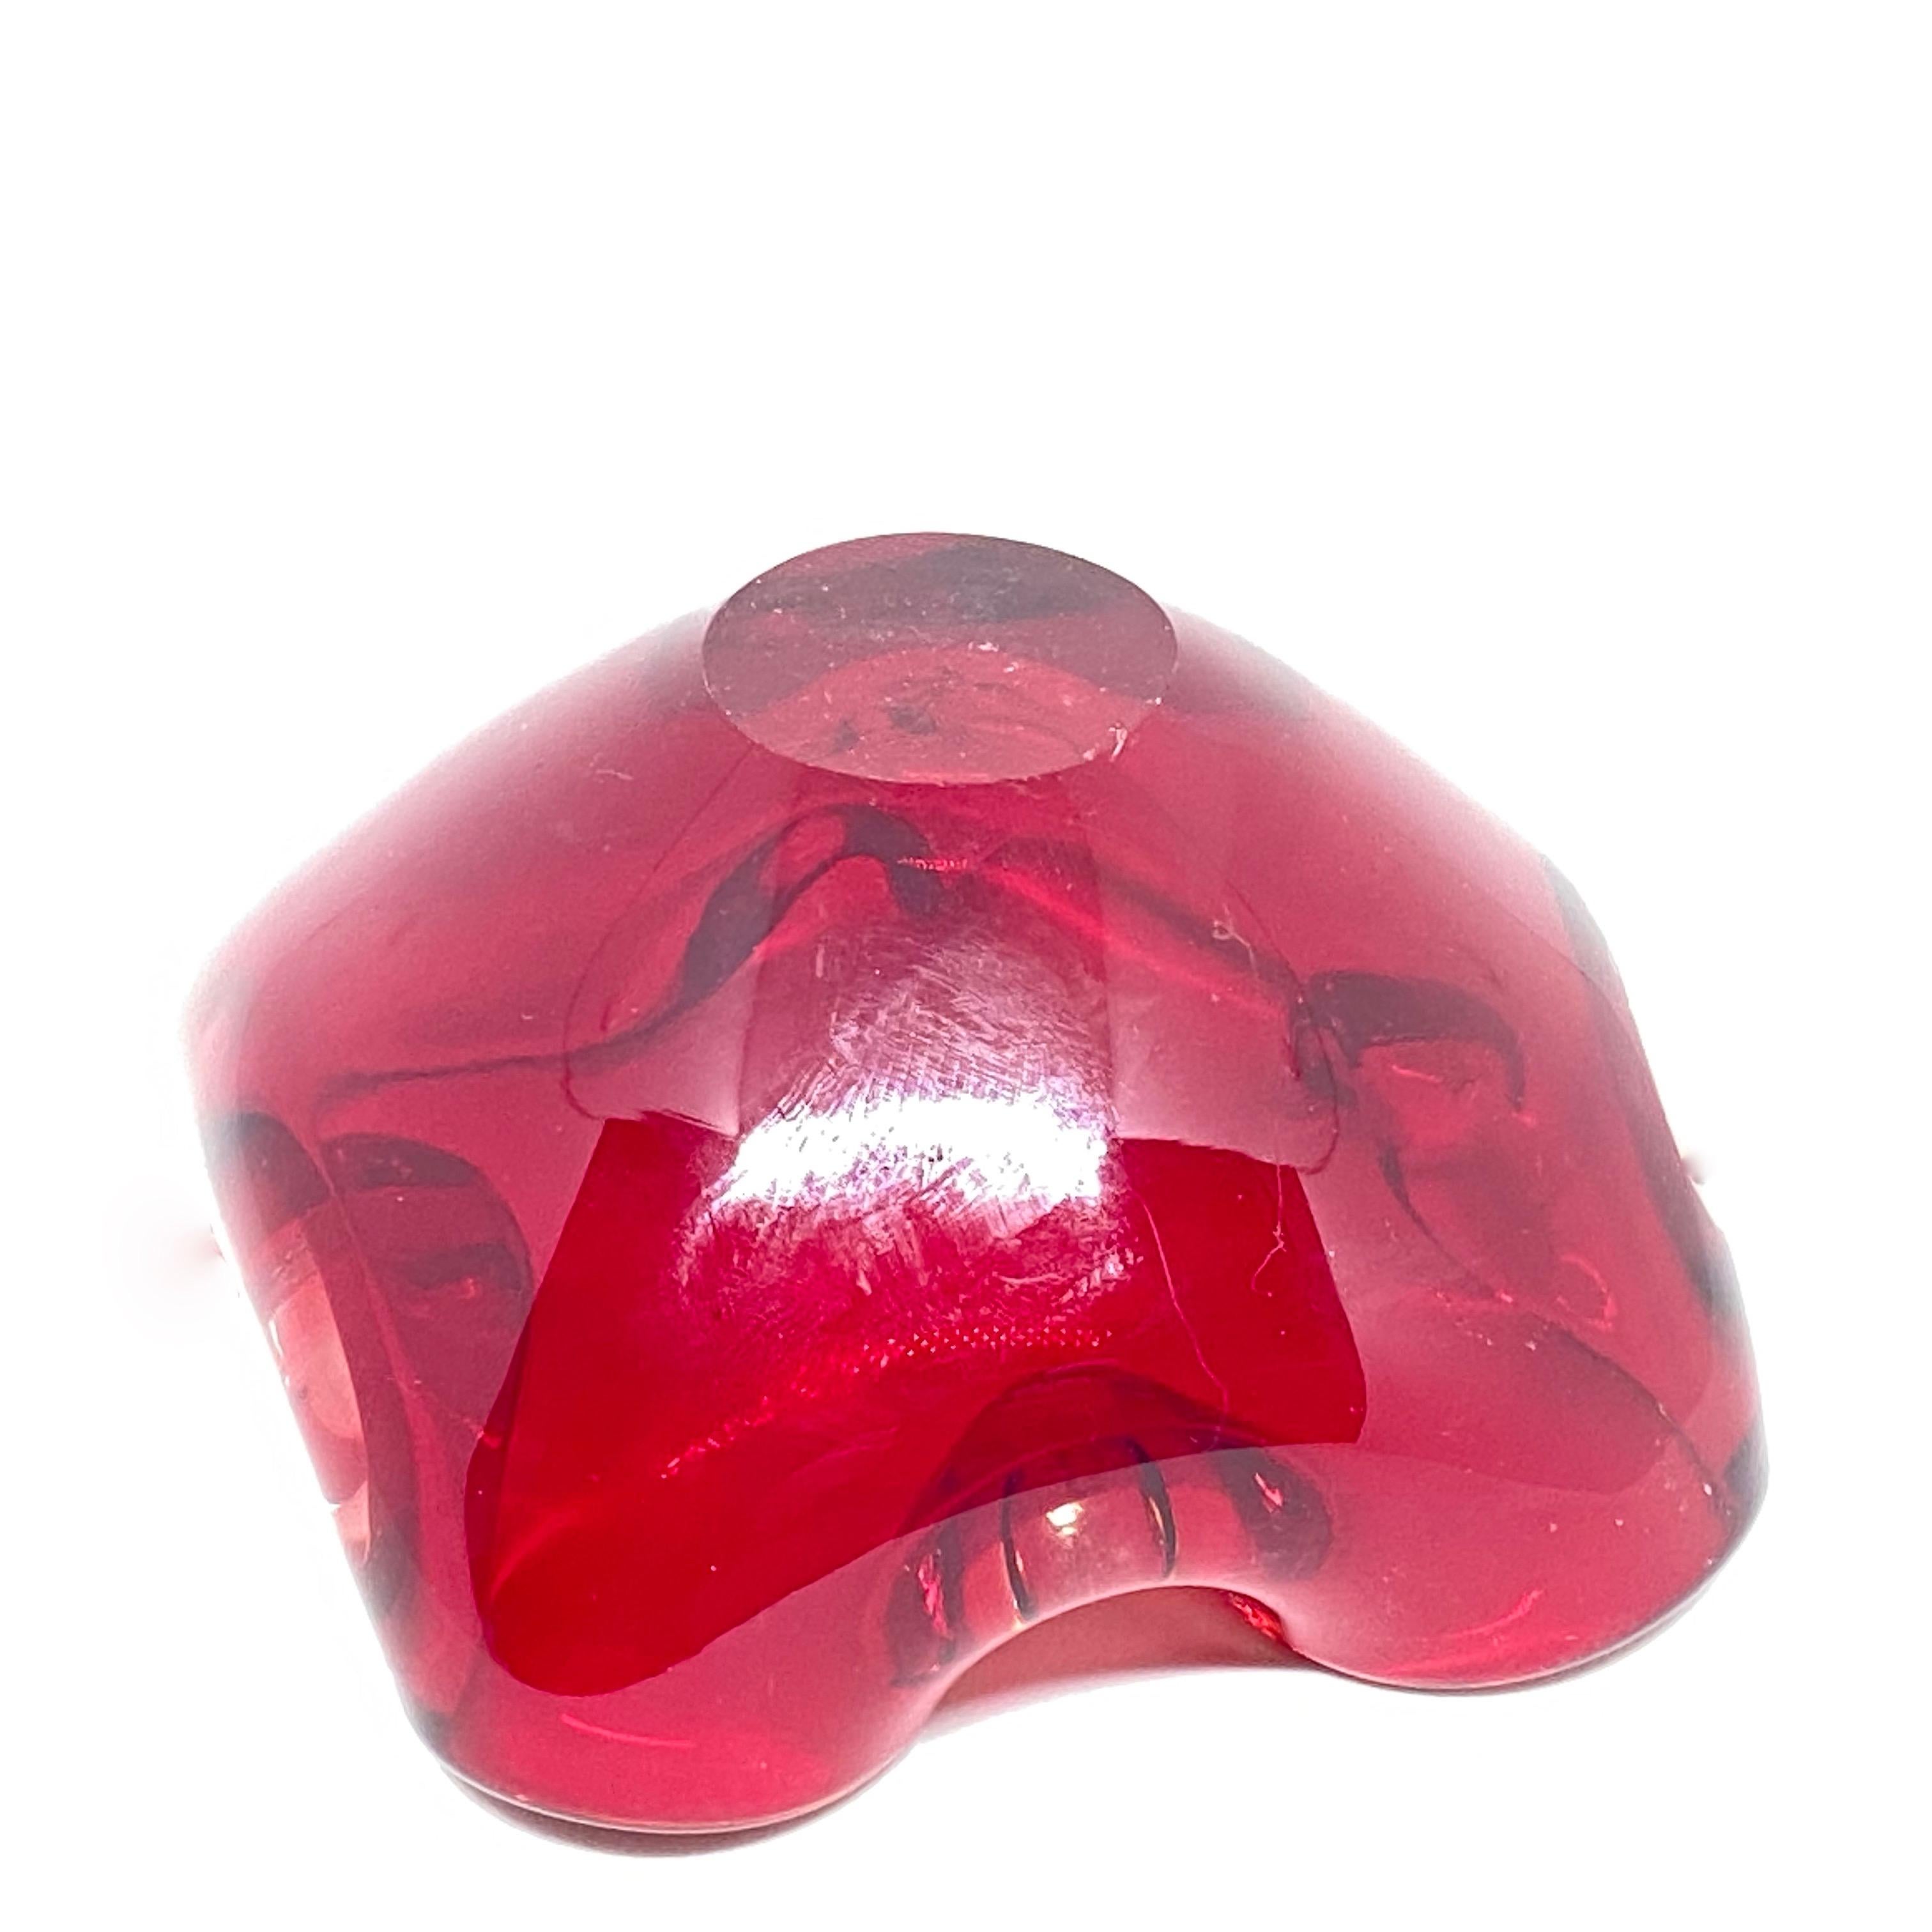 Late 20th Century Petite Murano Sommerso Ruby Red Glass Bowl Catchall, Vintage, Italy, 1970s